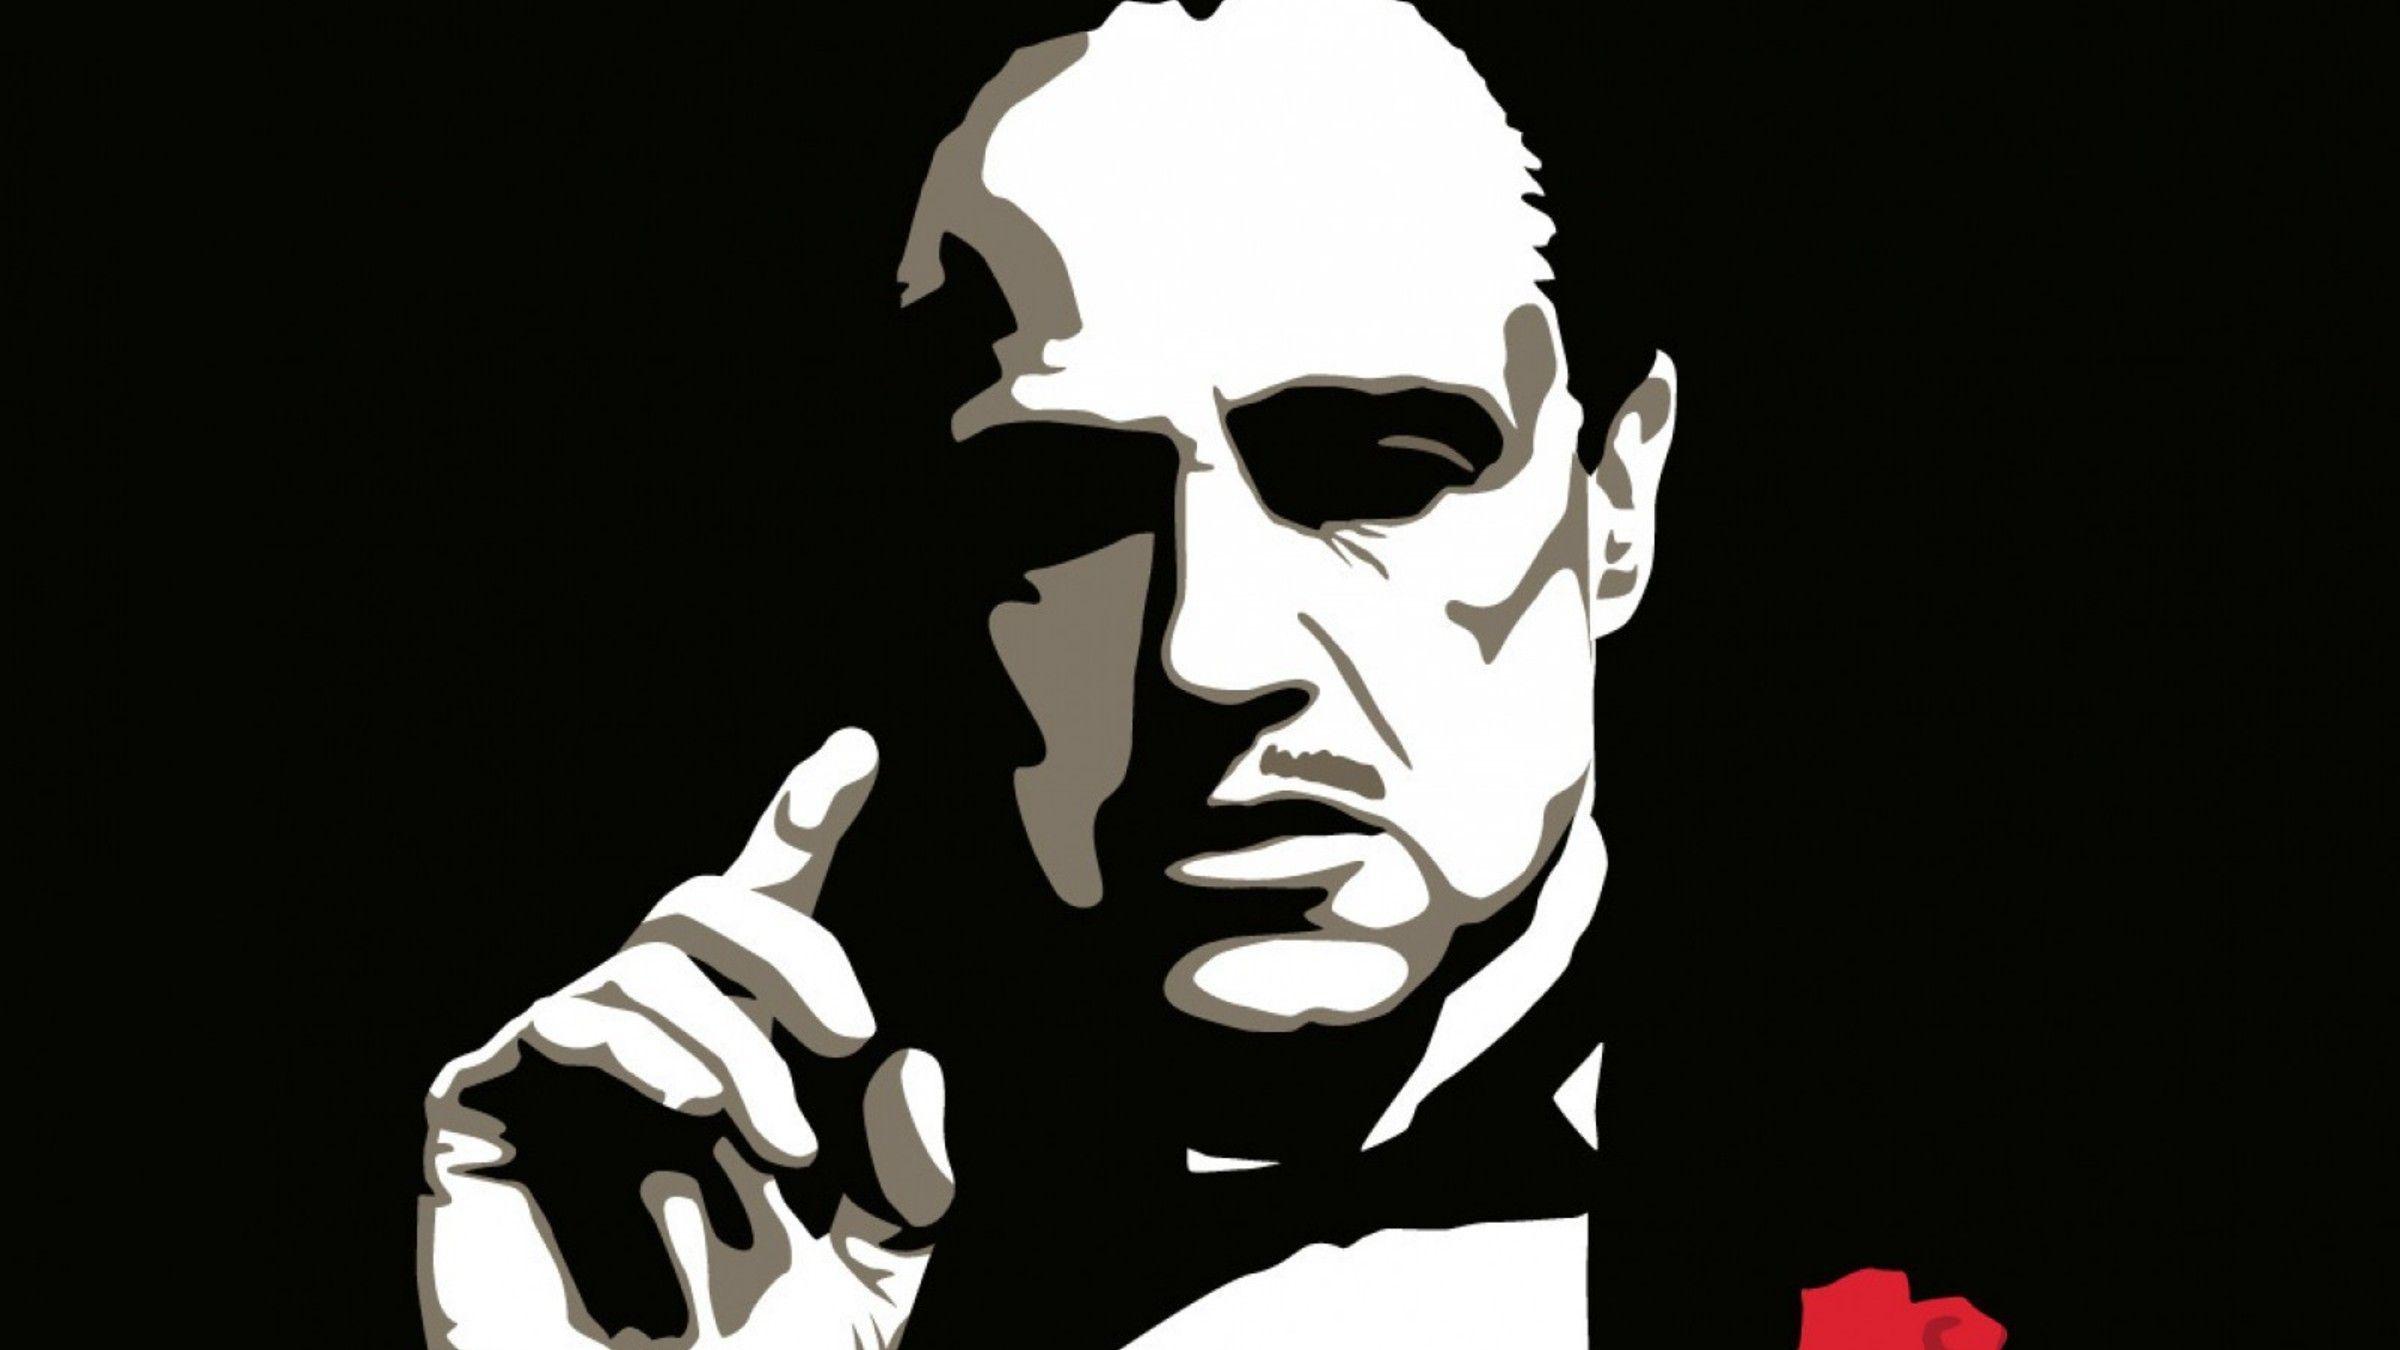 God the godfather wallpapers.